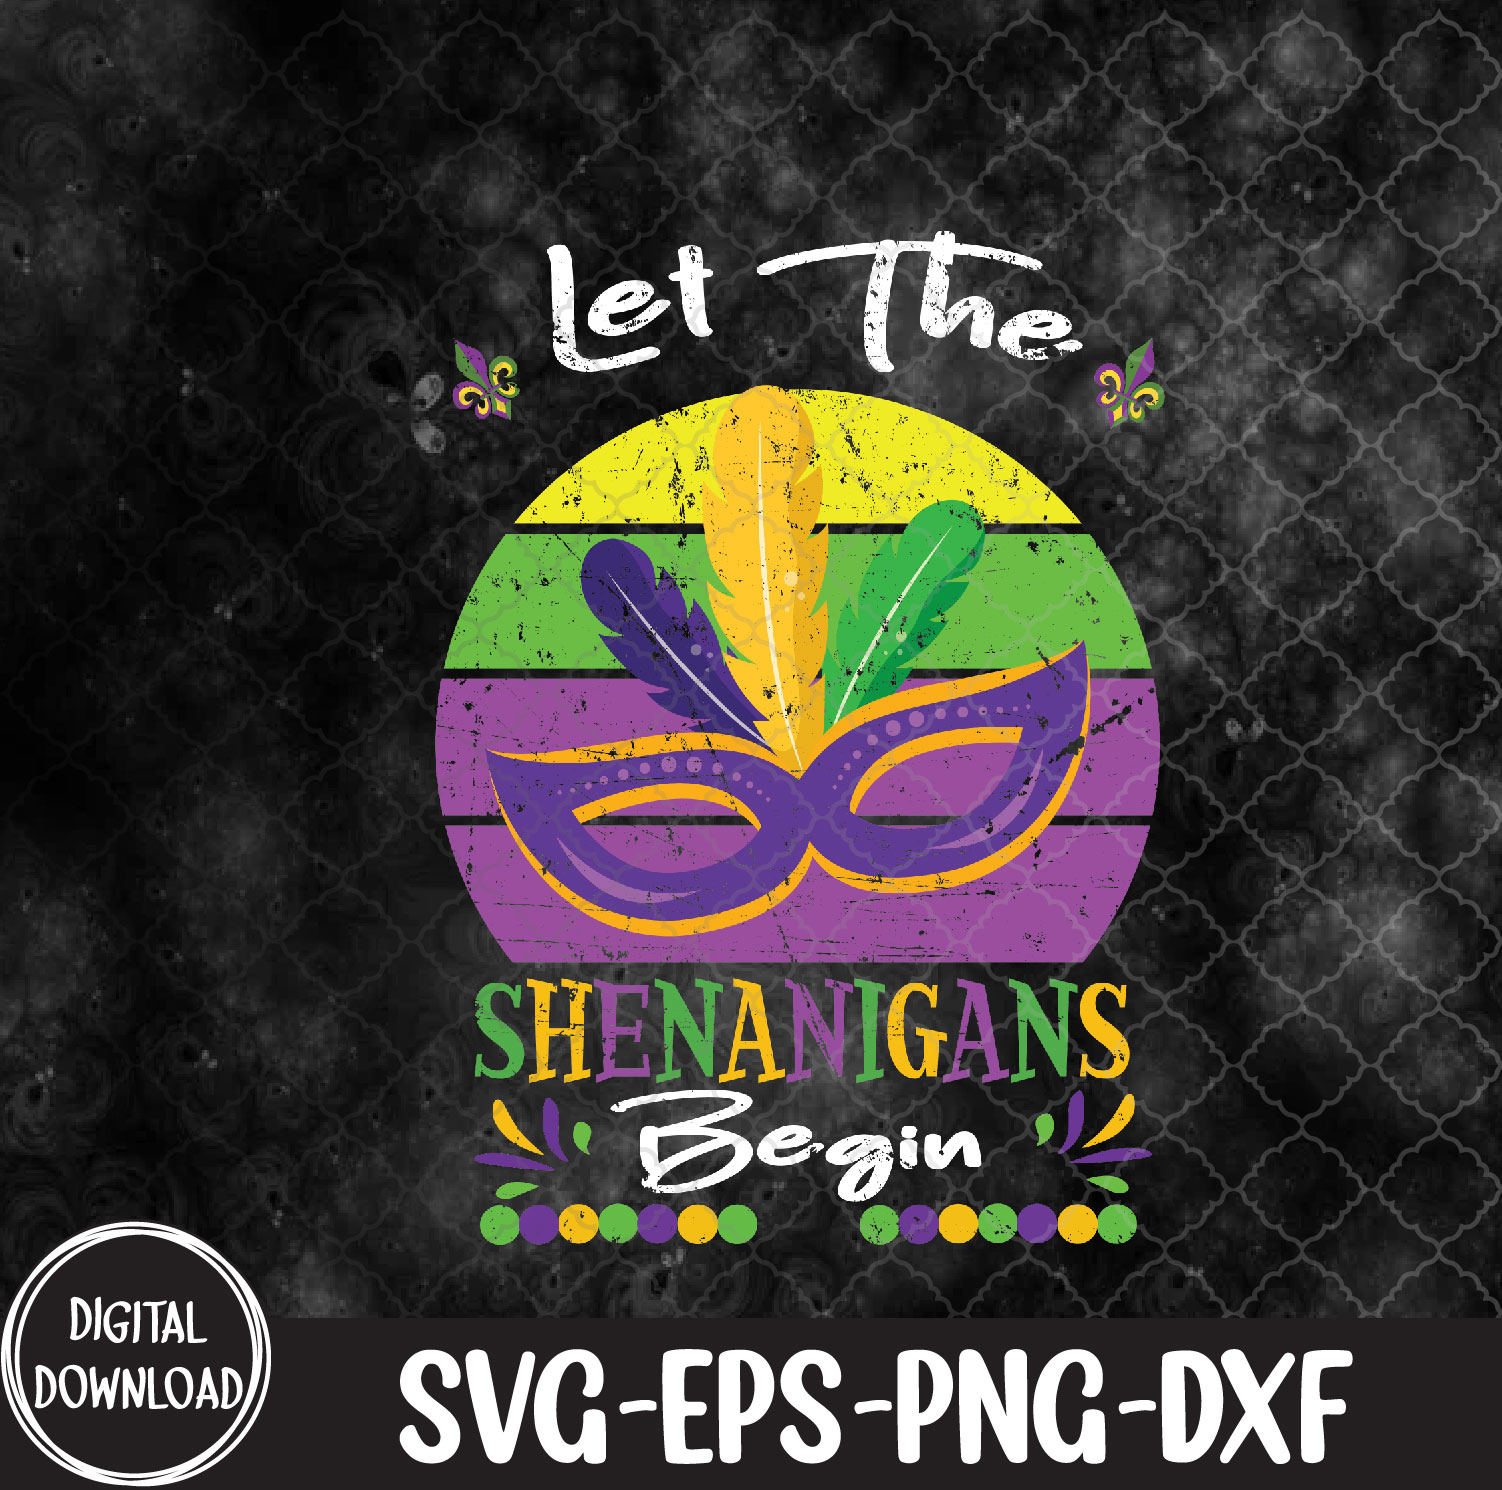 WTMNEW9file 09 94 Mardi Gras Costume Let The Shenanigans Begin Mask, Mardi Gras svg, Shenanigans svg, Svg, Eps, Png, Dxf